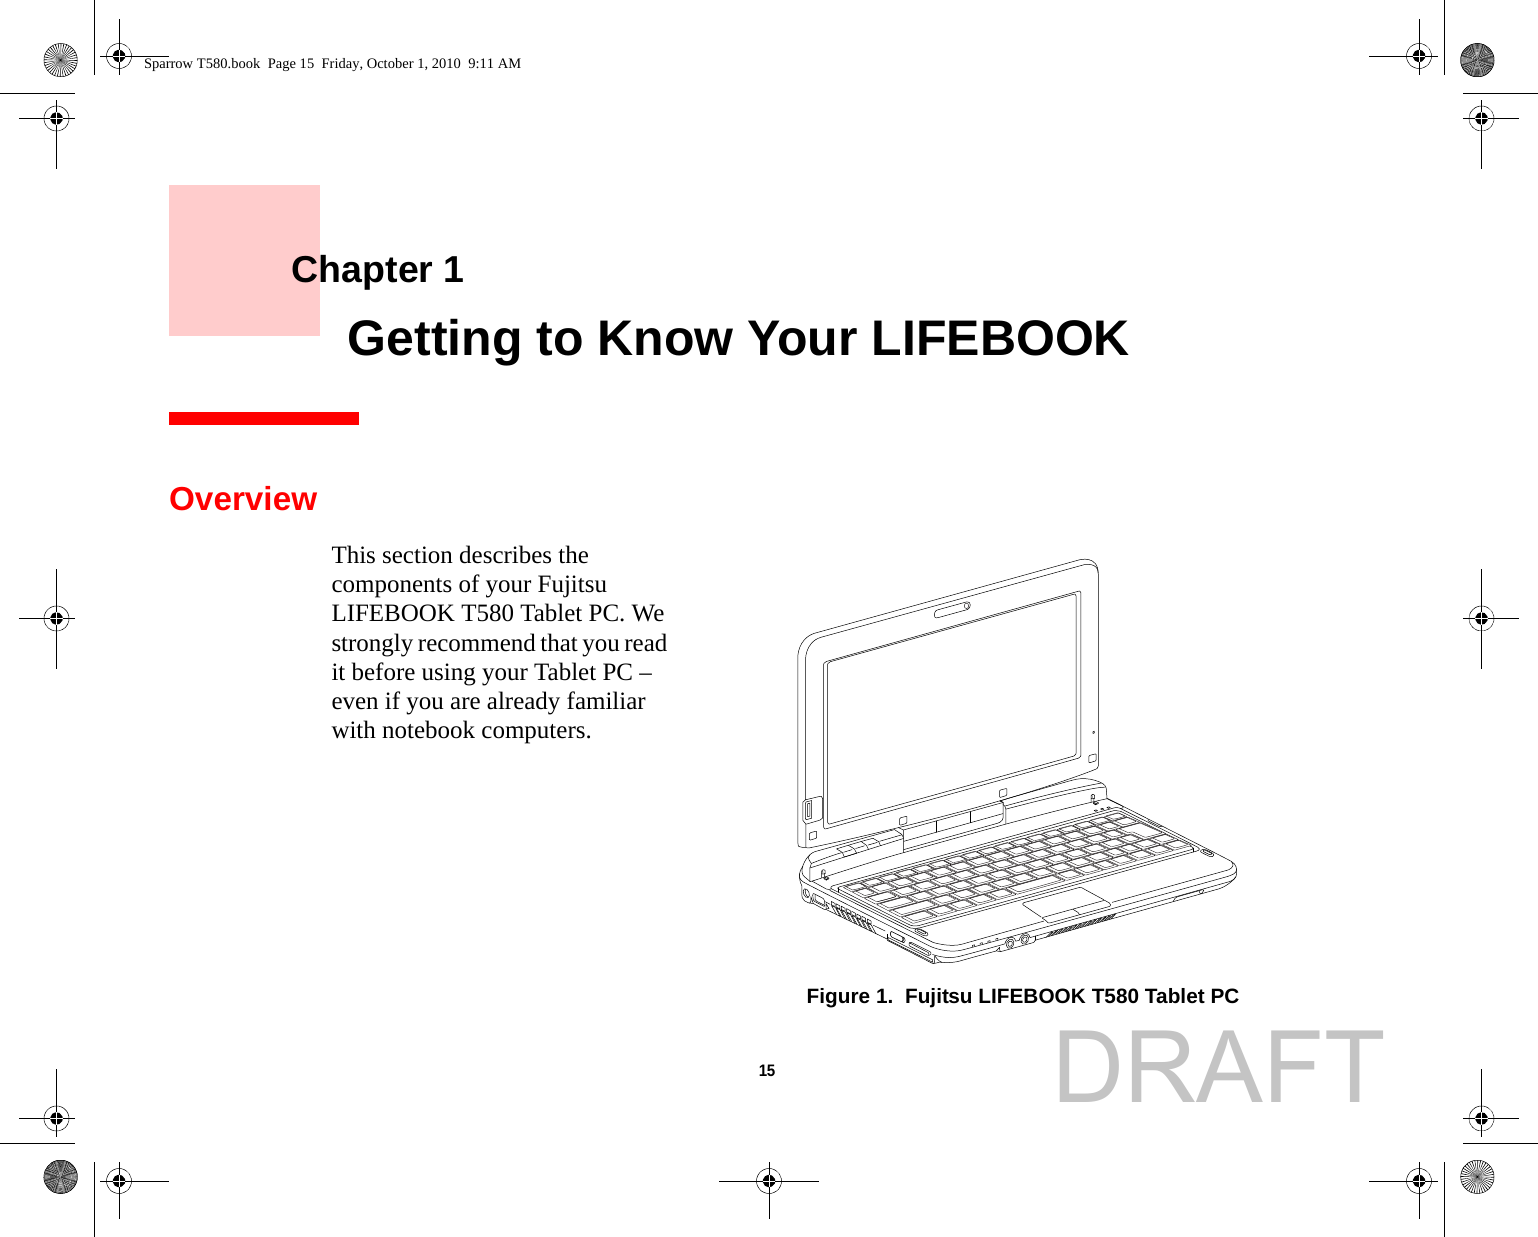 15     Chapter 1    Getting to Know Your LIFEBOOKOverviewThis section describes the components of your Fujitsu LIFEBOOK T580 Tablet PC. We strongly recommend that you read it before using your Tablet PC – even if you are already familiar with notebook computers.Figure 1.  Fujitsu LIFEBOOK T580 Tablet PCSparrow T580.book  Page 15  Friday, October 1, 2010  9:11 AMDRAFT